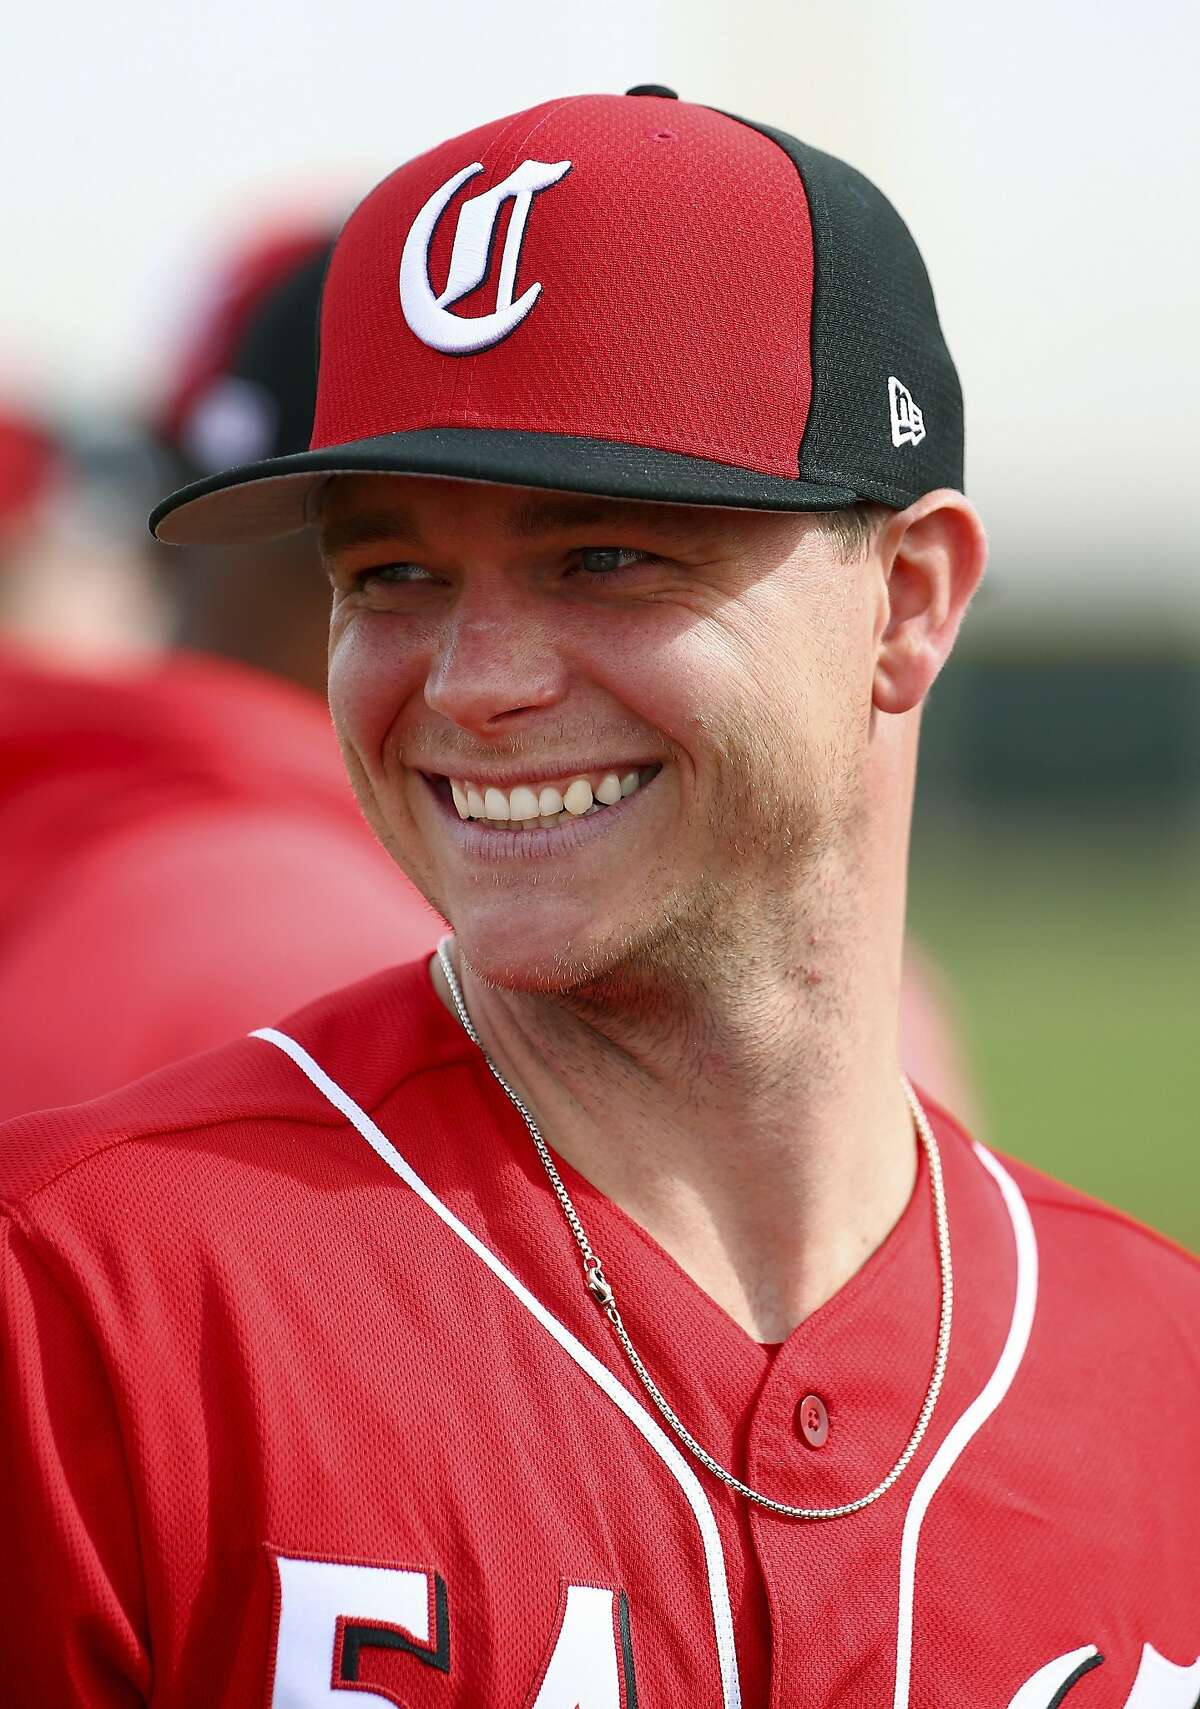 The Red Report 2020 - Sonny Gray - Red Reporter